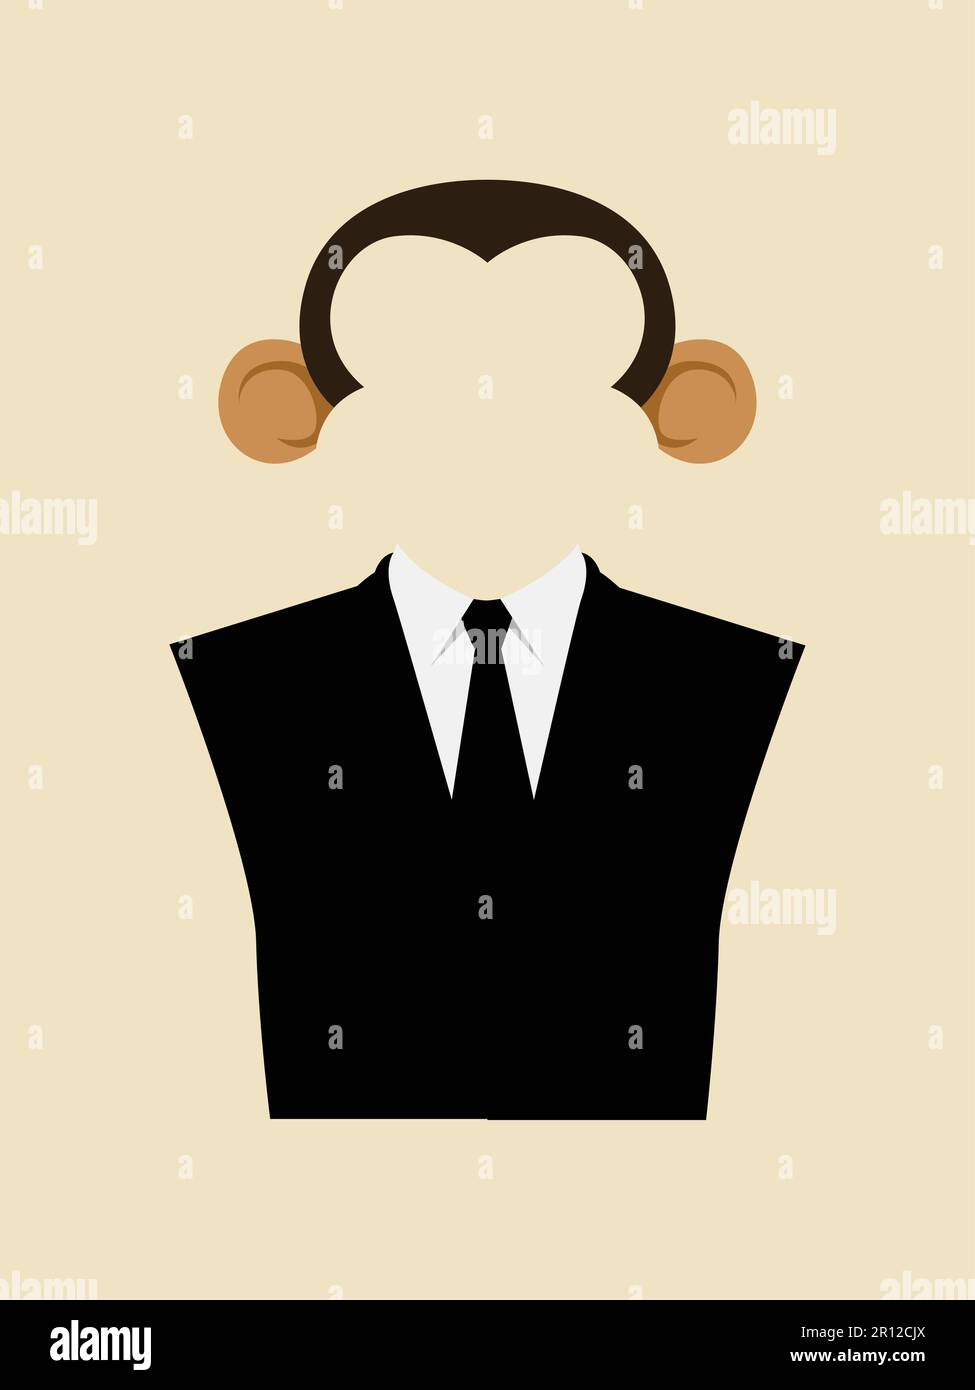 Symbol of a monkey wearing a suit Stock Vector